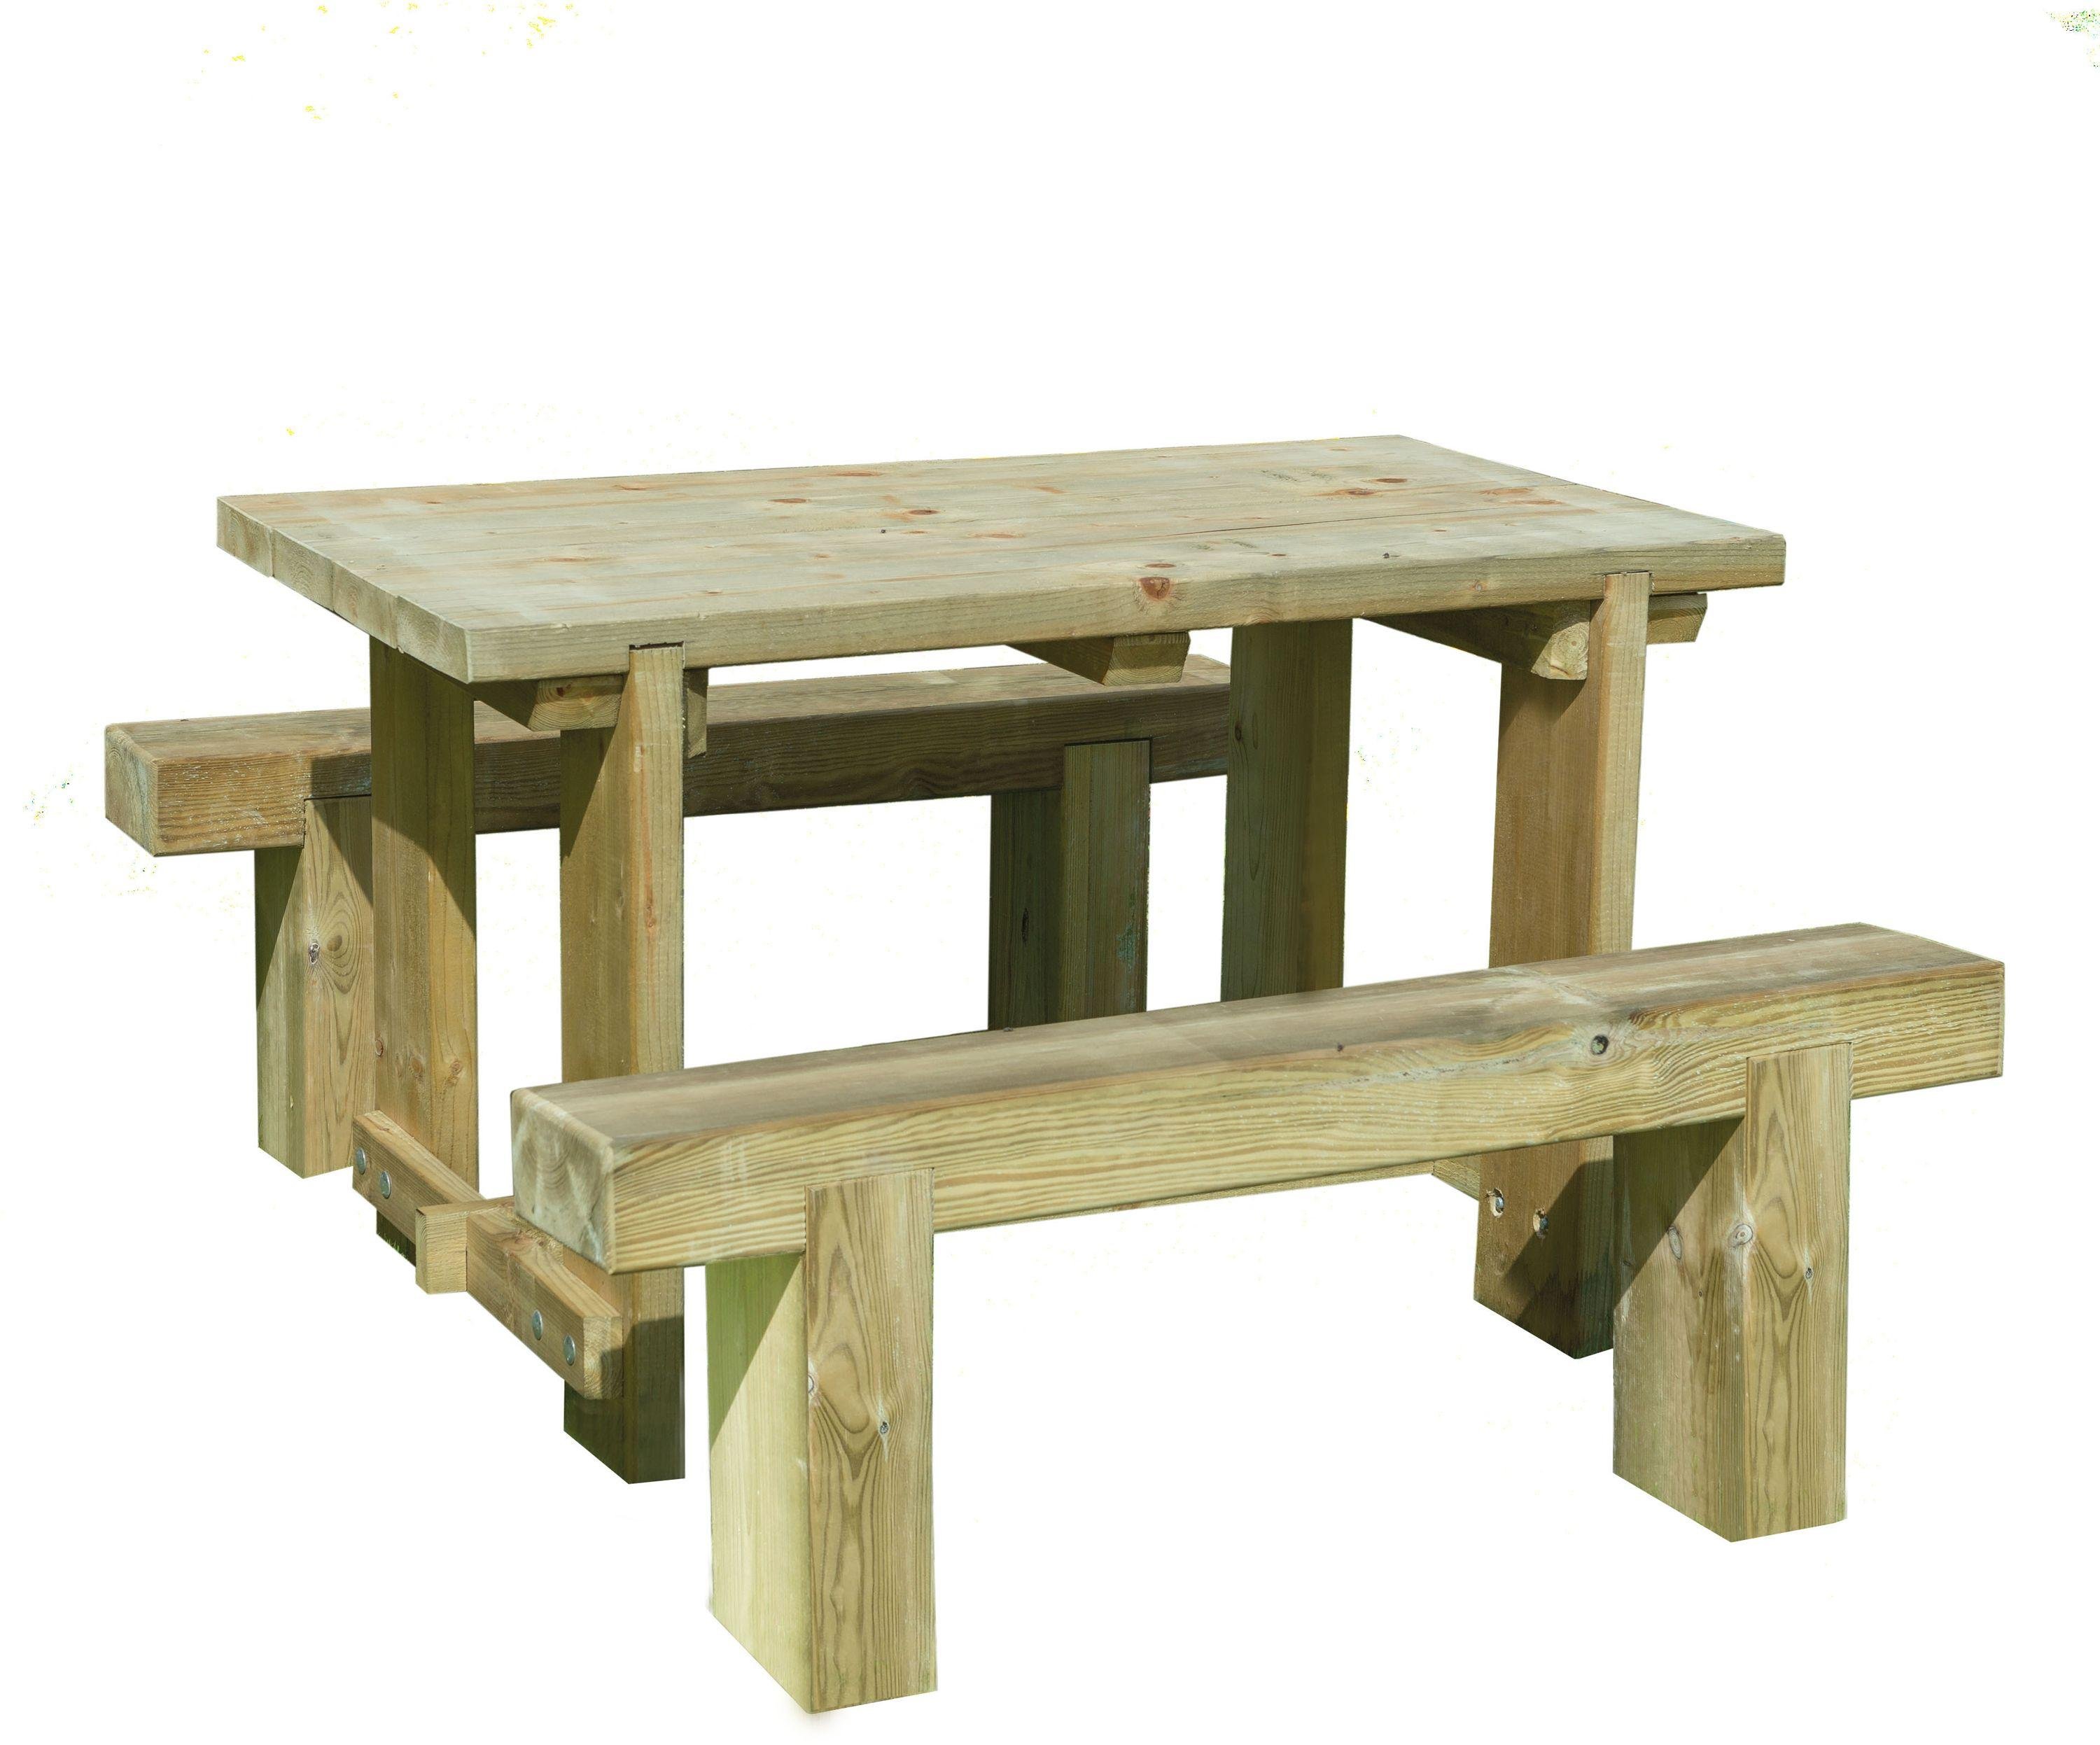 Forest Garden Sleeper Benches and Table Set 1.2m